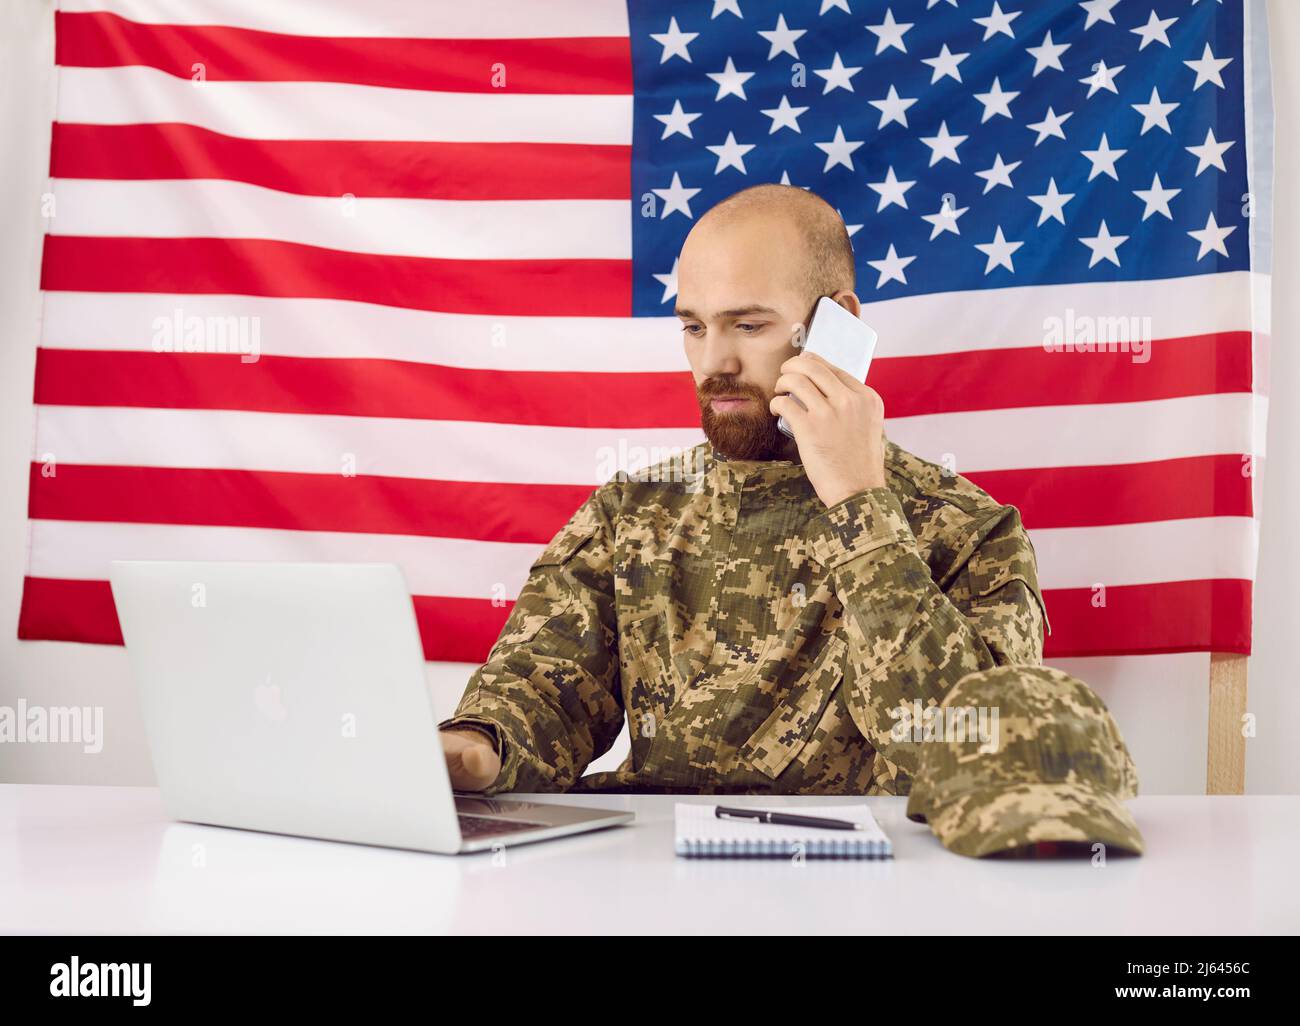 American military man uses laptop, mobile phone and notebook to work in headquarters building. Stock Photo